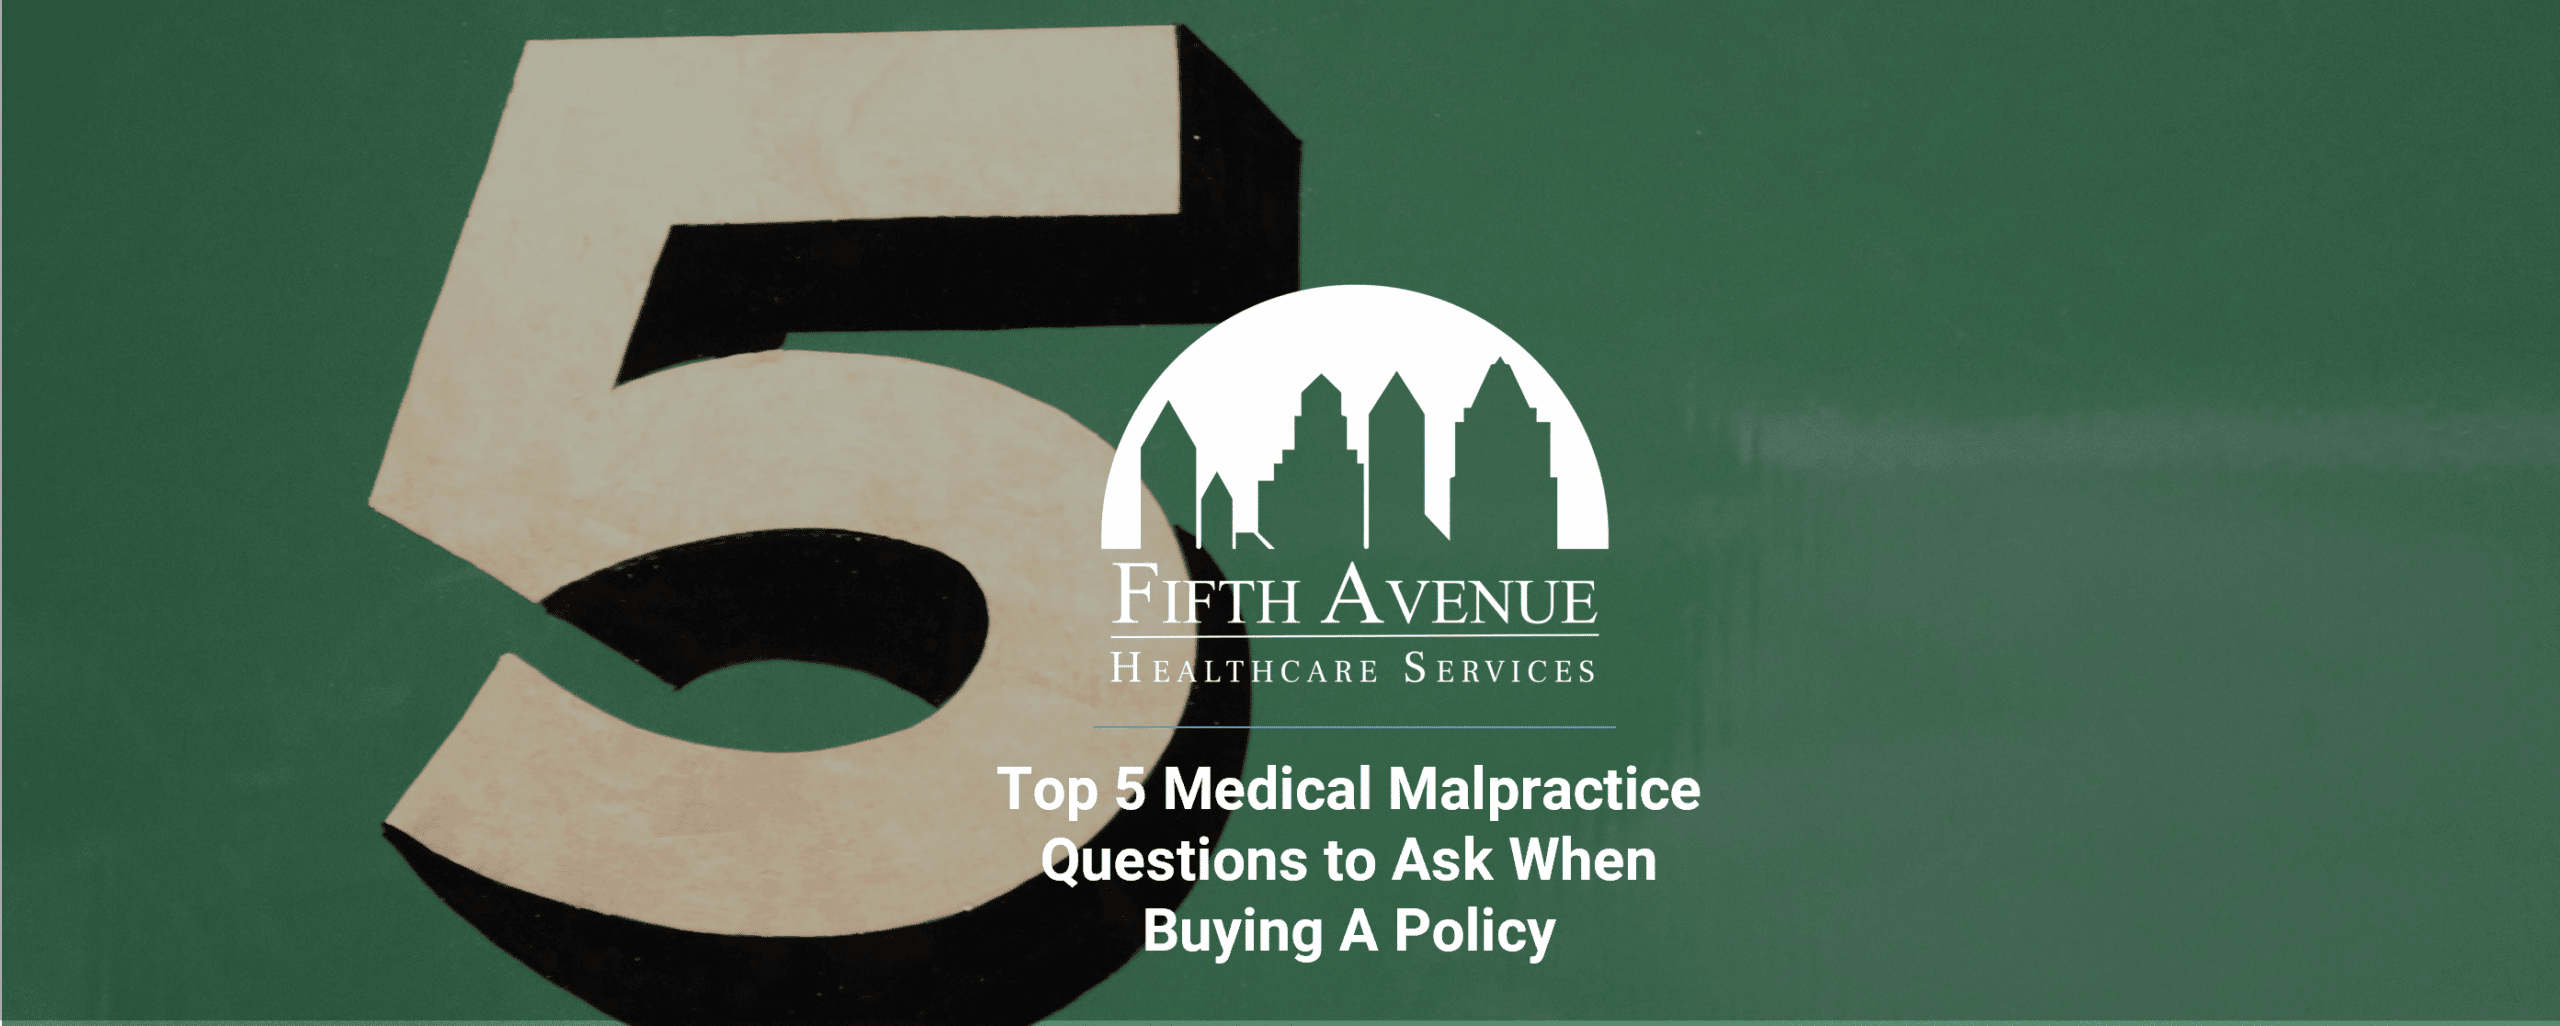 Top 5 Medical Malpractice Questions to Ask When Buying a Policy